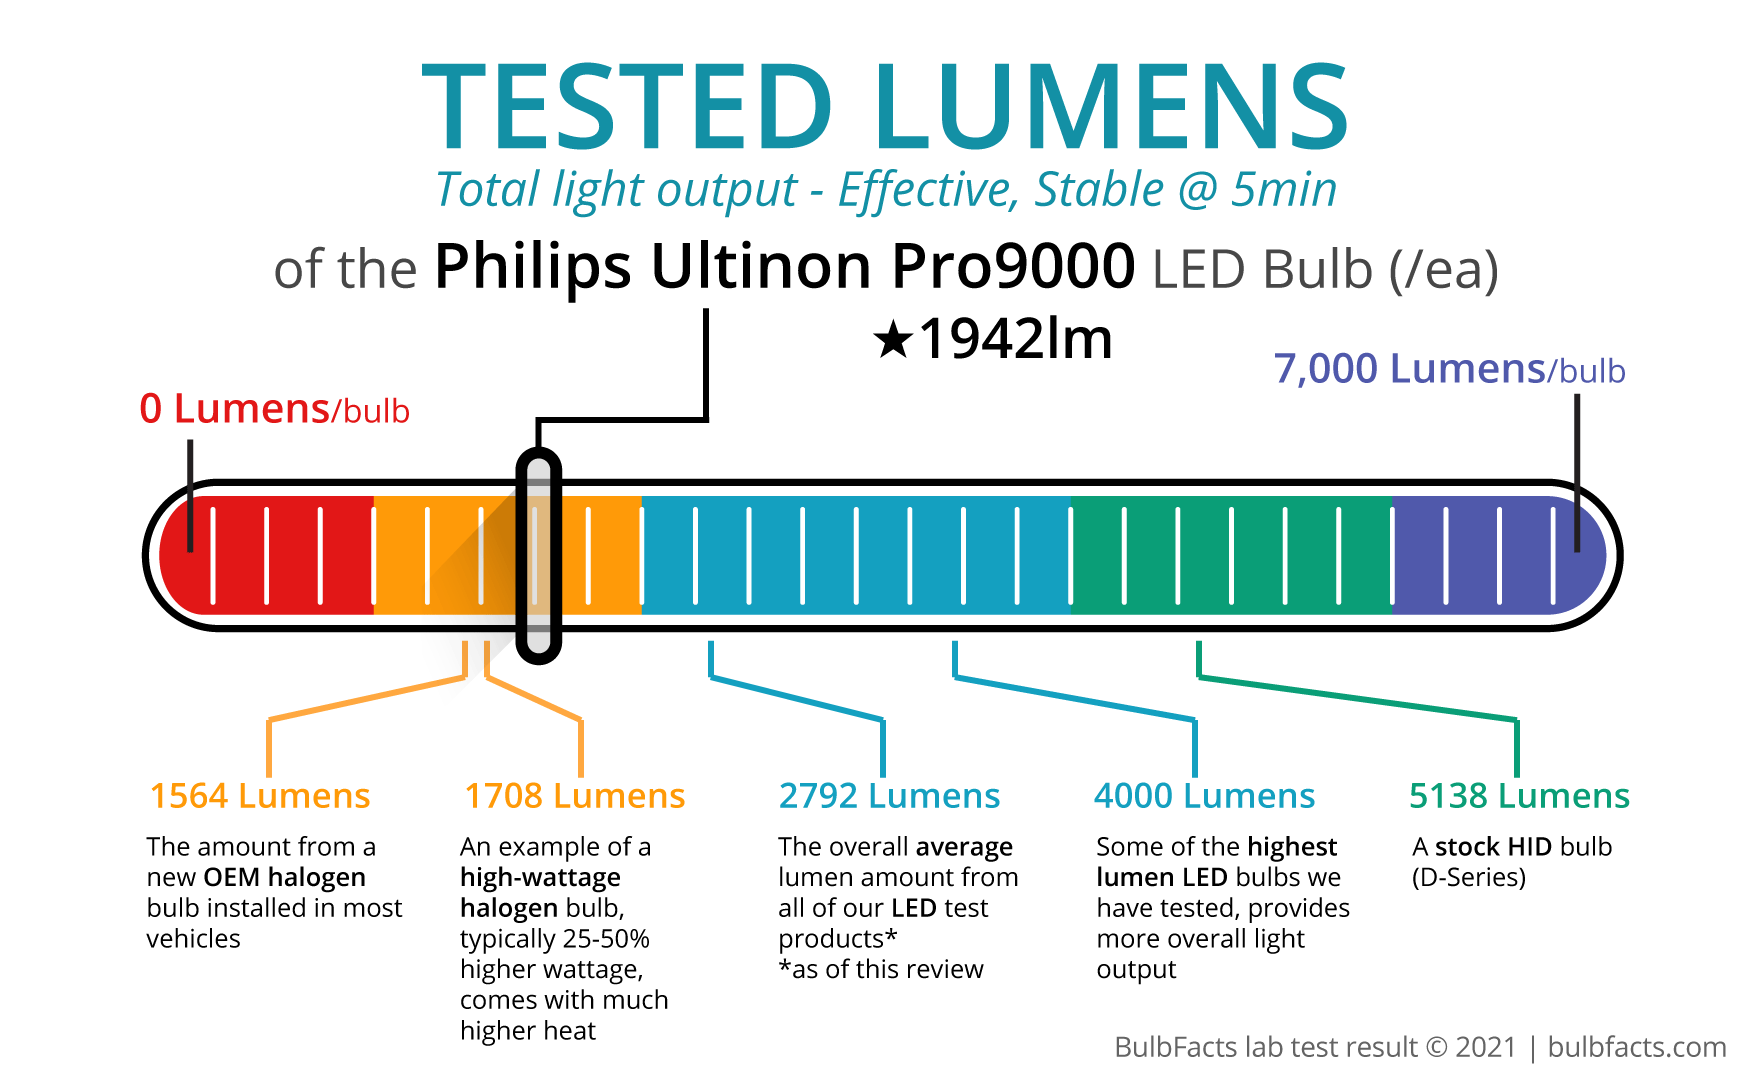 NEW Cheap Philips Ultinon Access 2500 H7 H18 LED Upgrade - Test Review 